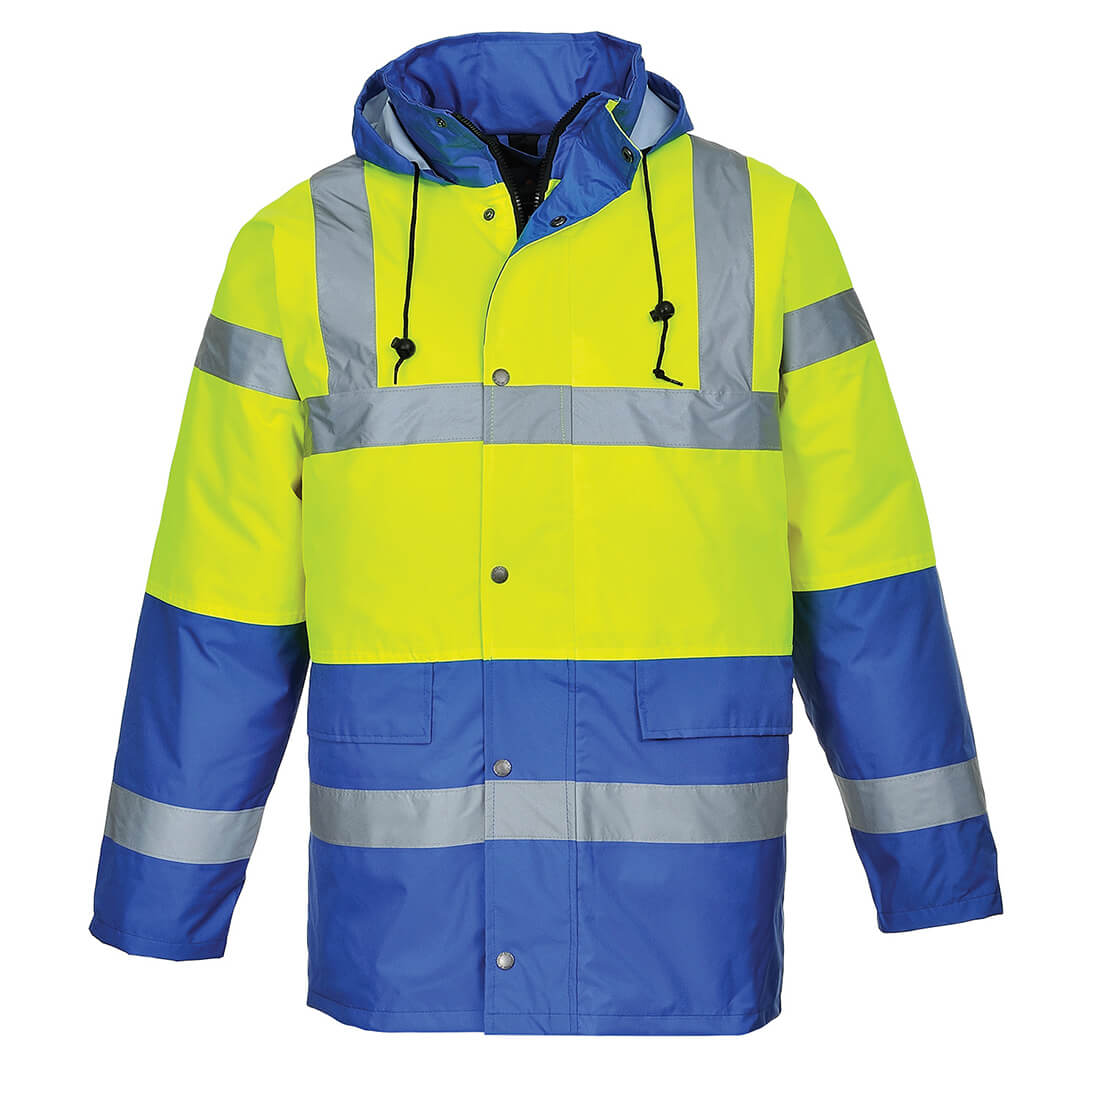 Image of Oxford Weave 300D Class 3 Hi Vis Contrast Traffic Jacket Yellow / Royal Blue S